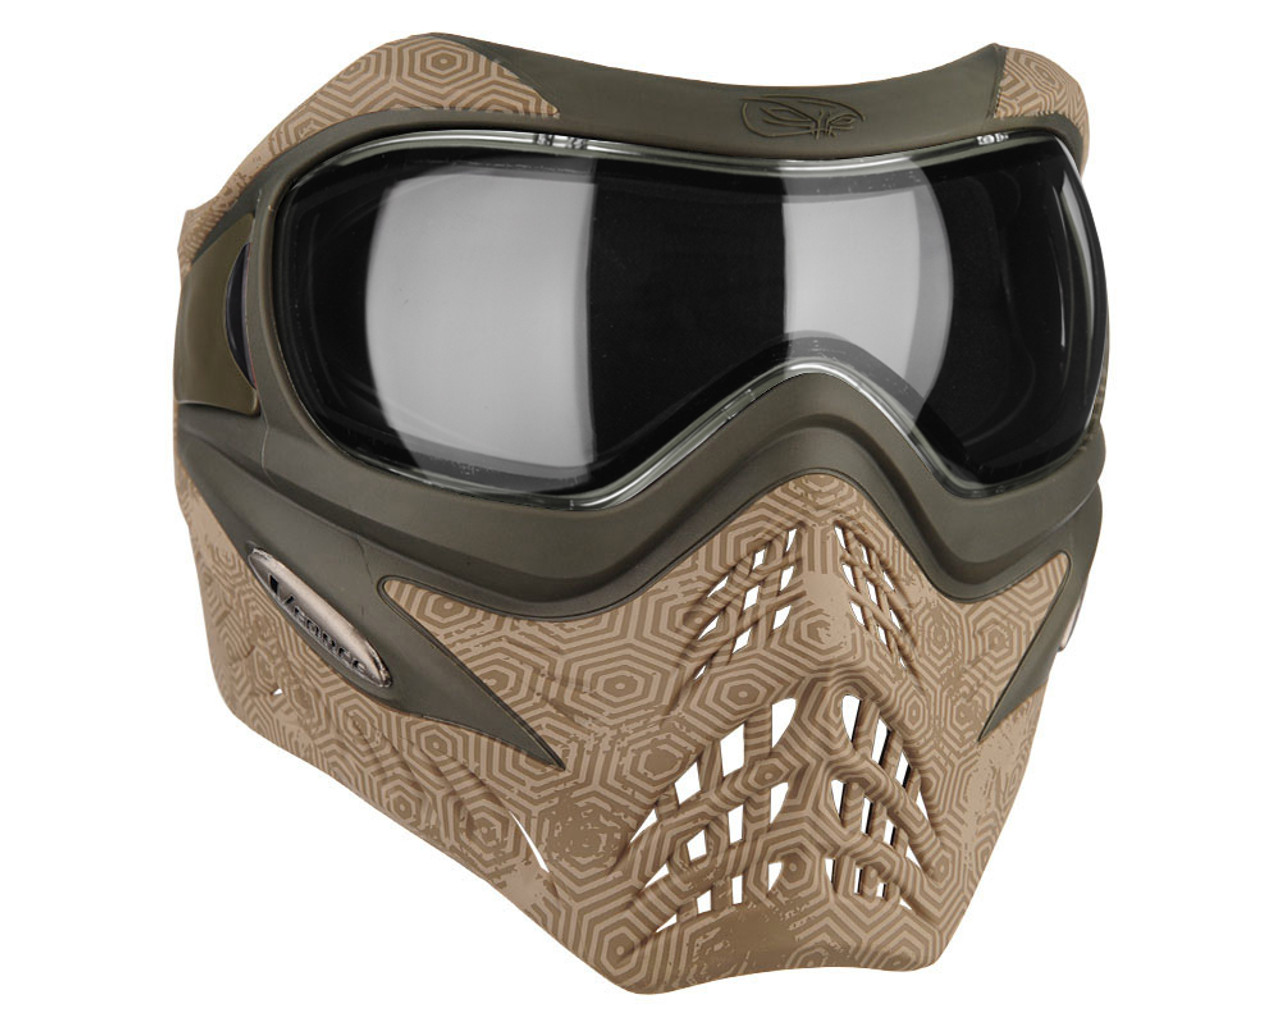 V-Force Grill Paintball Mask/Goggle - SE Hextreme Sand